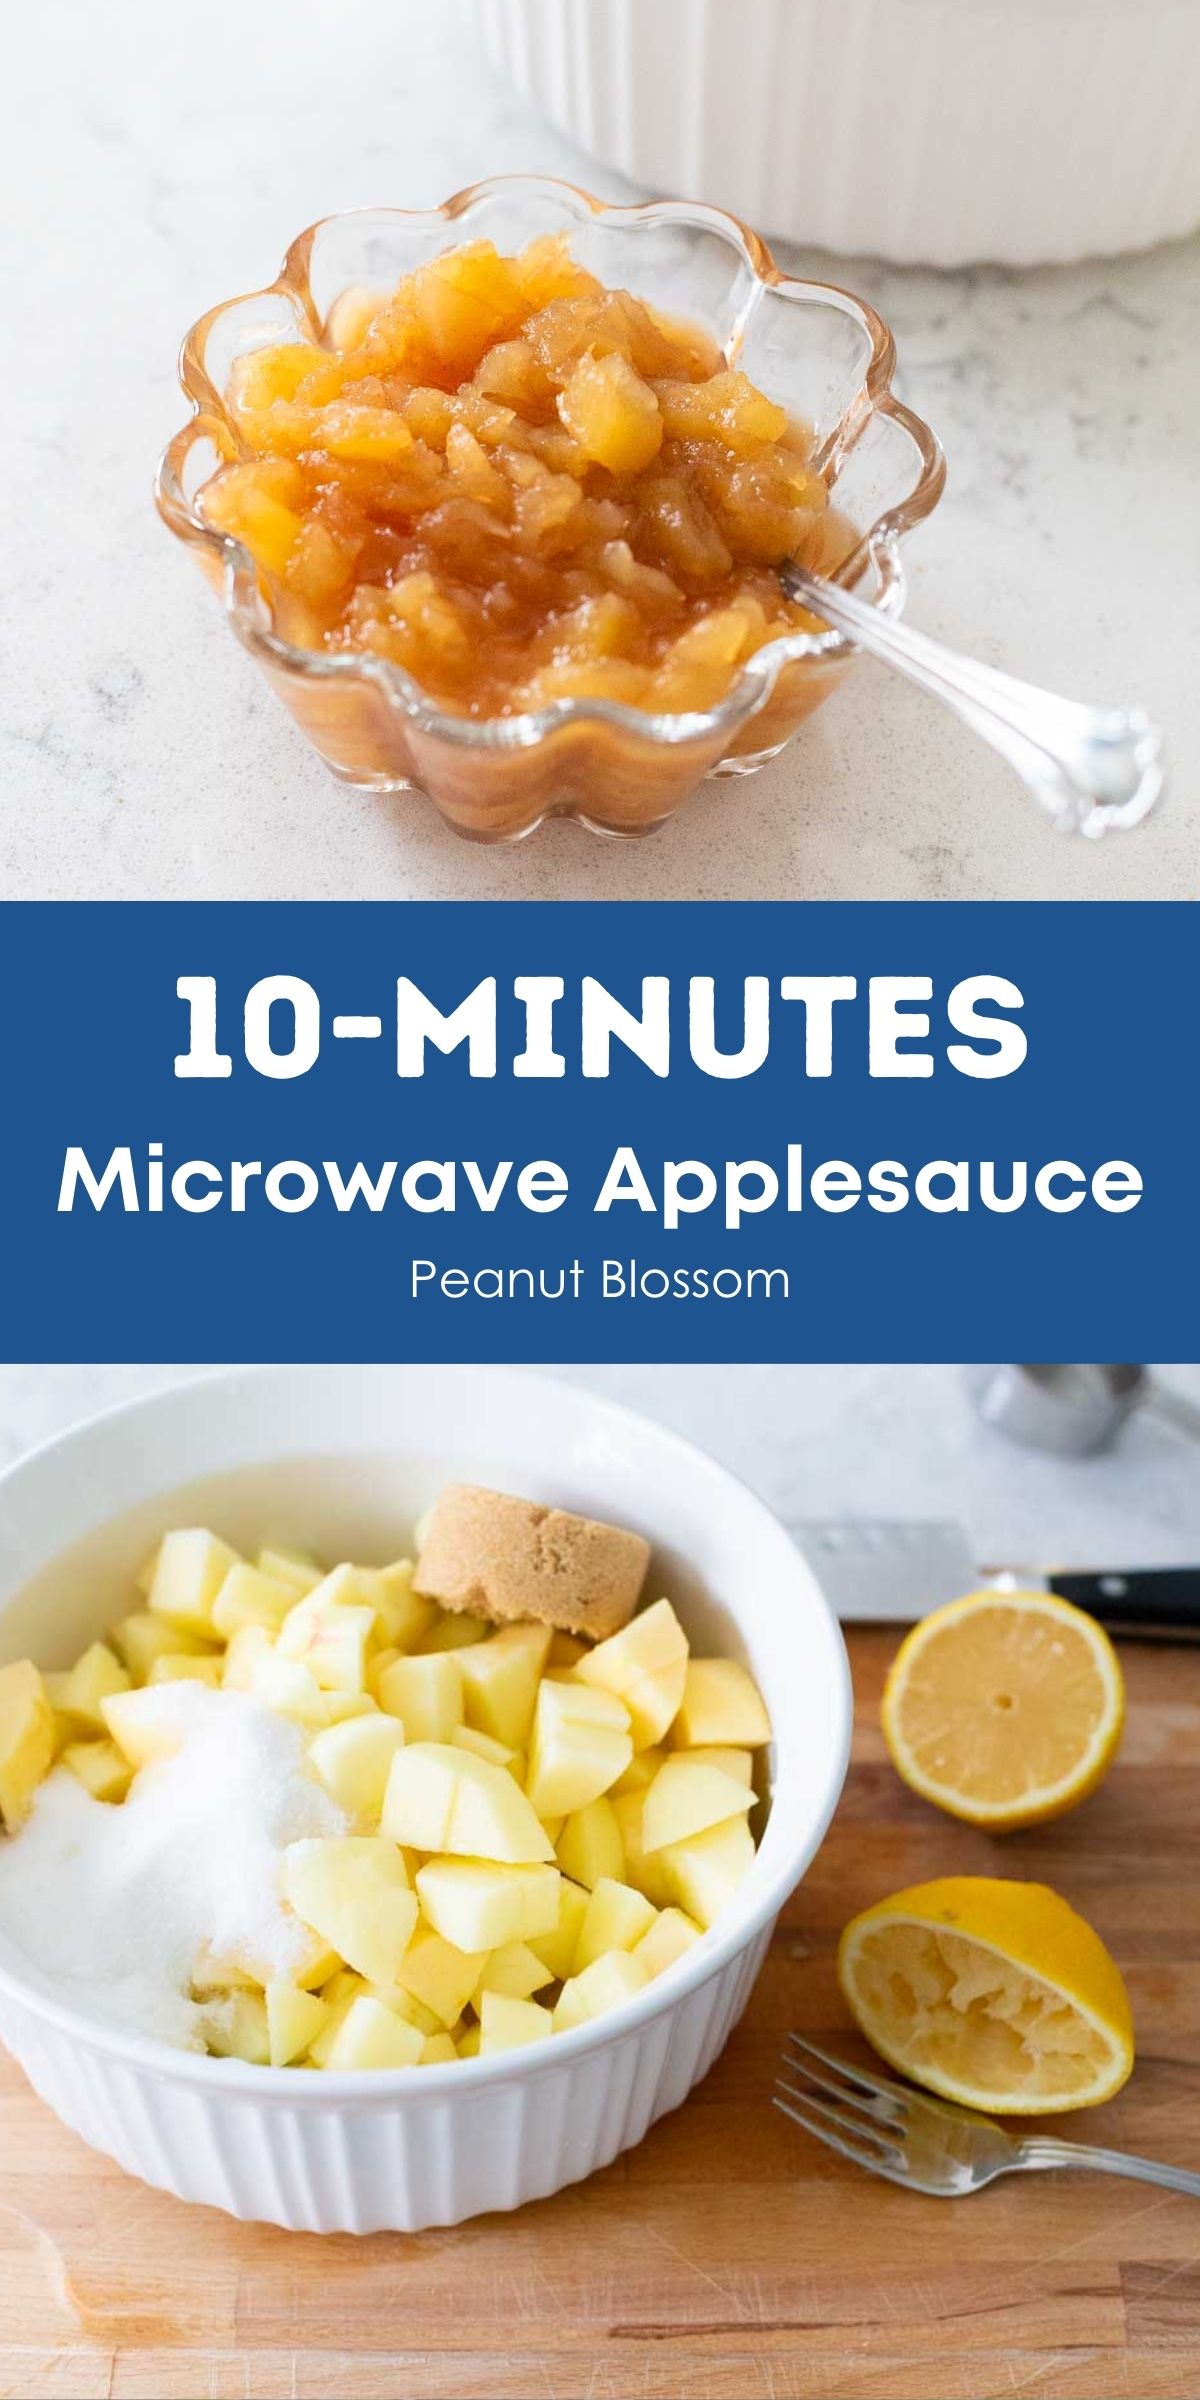 A photo collage shows the finished microwave applesauce and the chopped apples in the microwave dish with sugar and squeezed lemons.